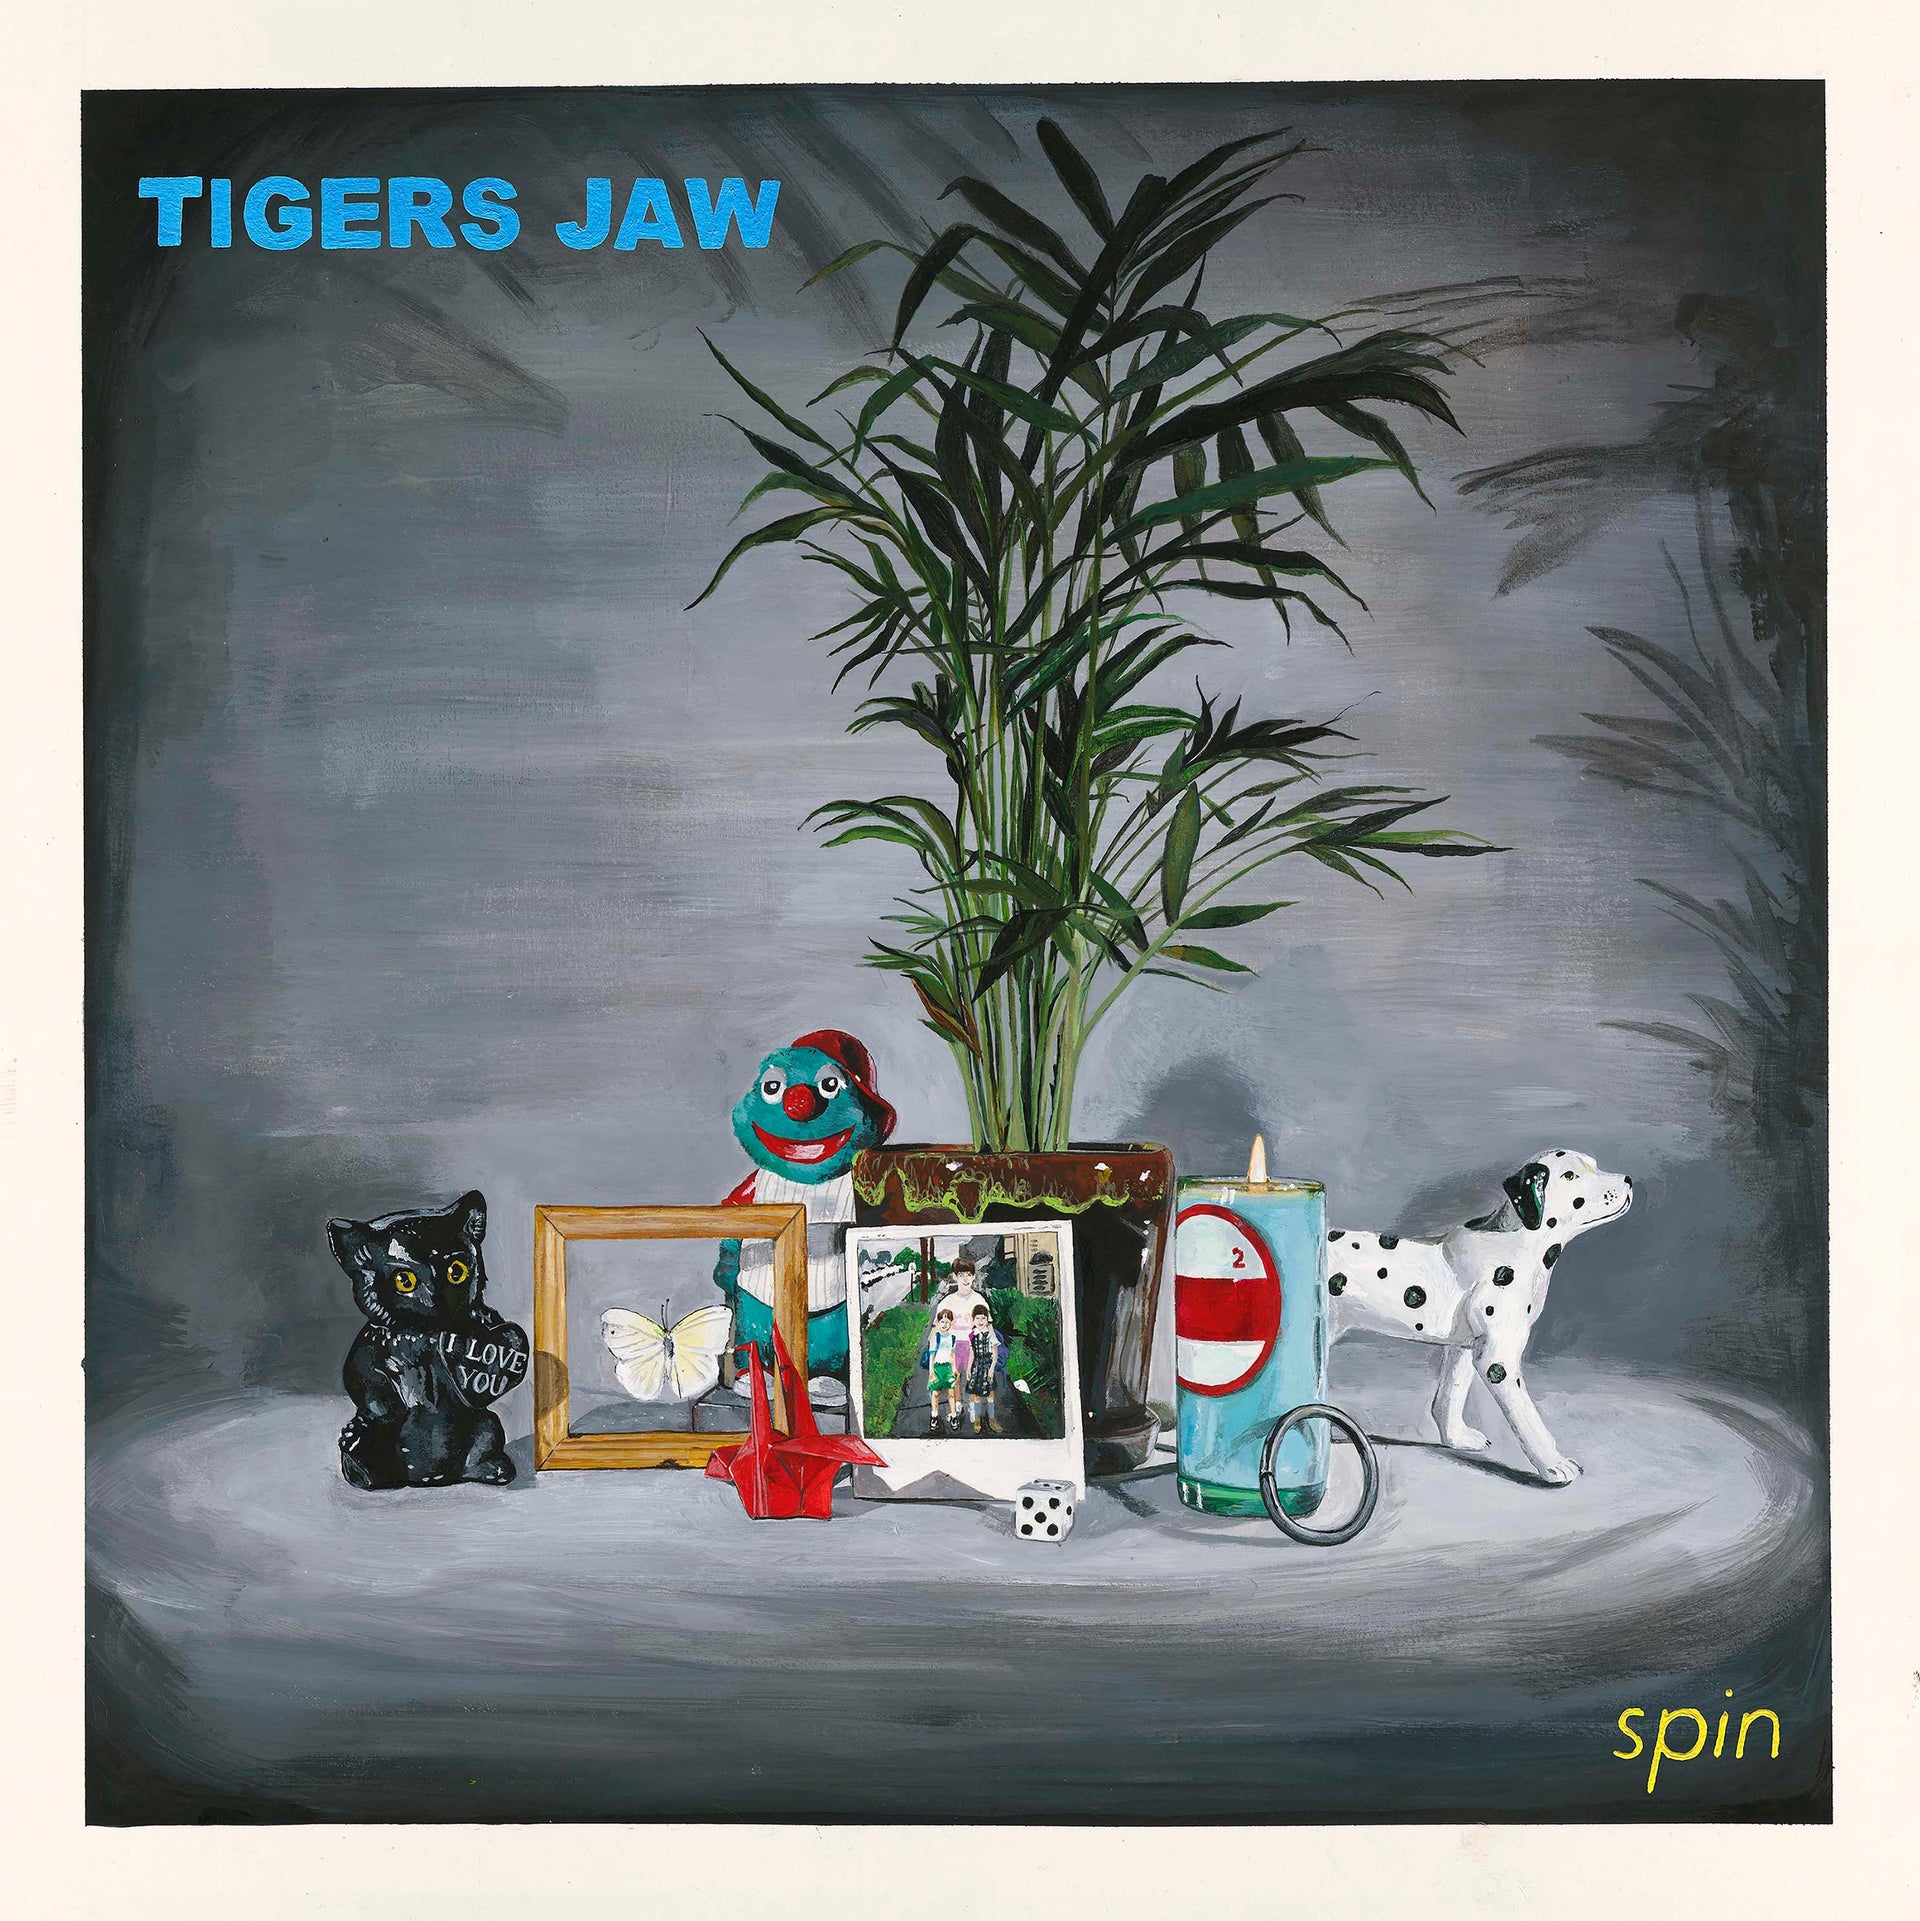 Buy – Tigers Jaw "Spin" CD – Band & Music Merch – Cold Cuts Merch